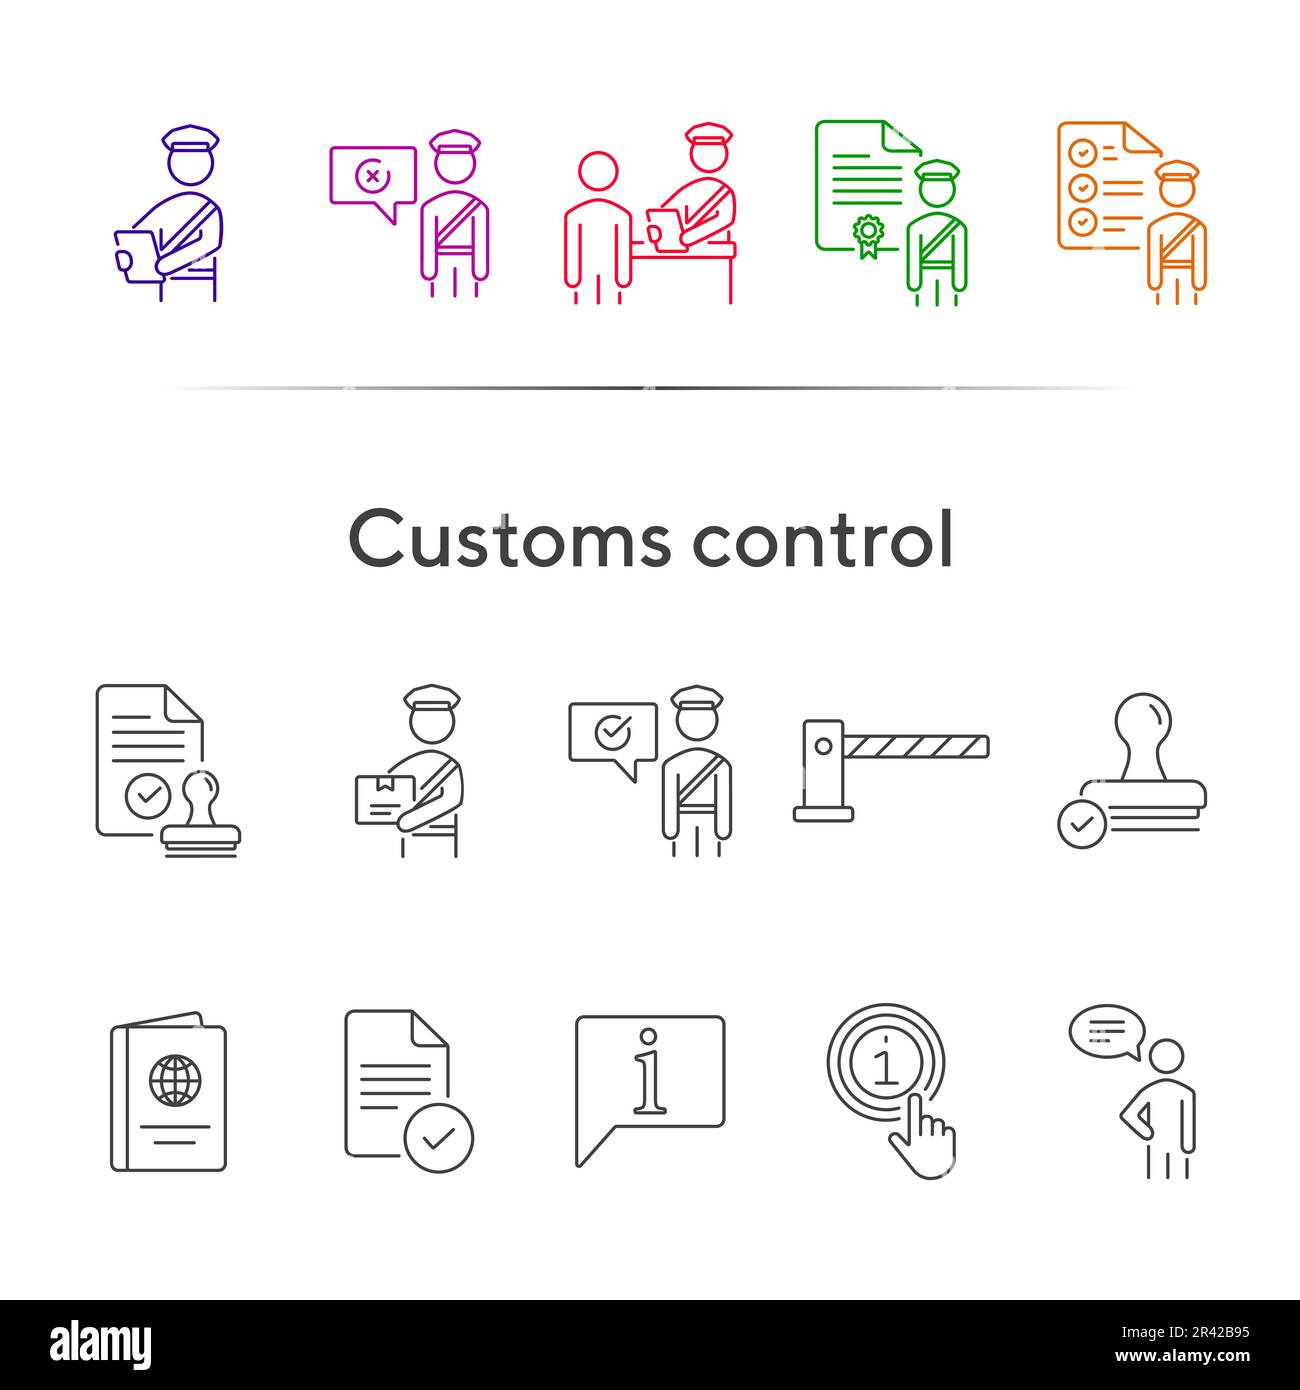 Customs control icons Stock Vector